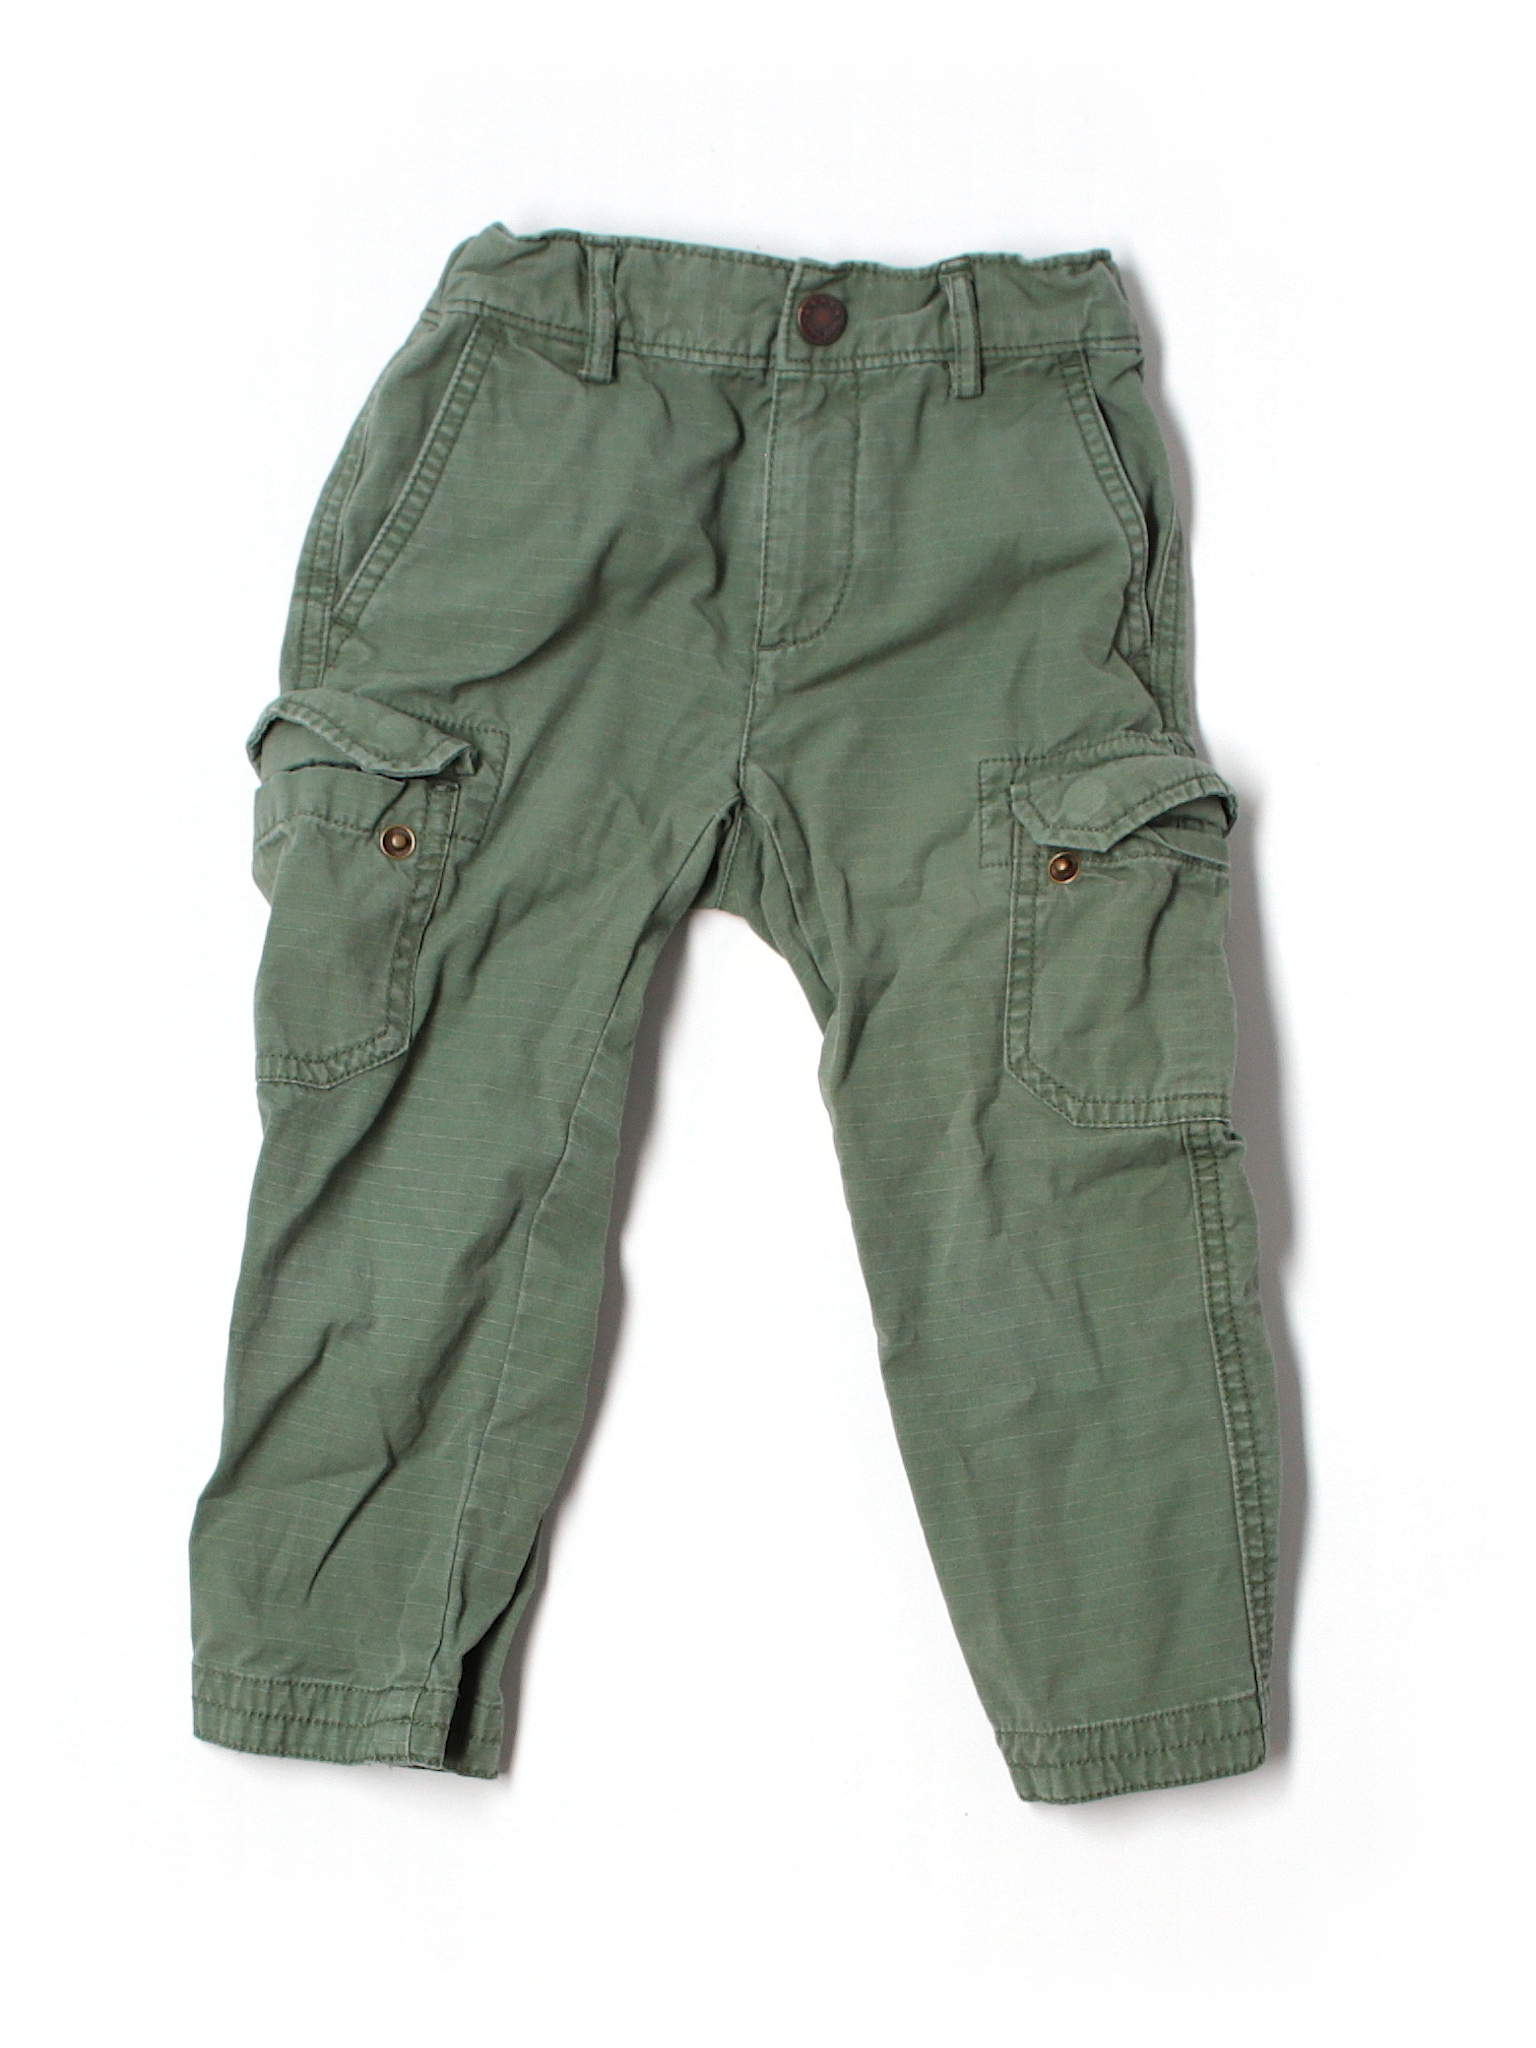 Crewcuts Outlet 100% Cotton Solid Dark Green Cargo Pants Size 3T - 63% ...